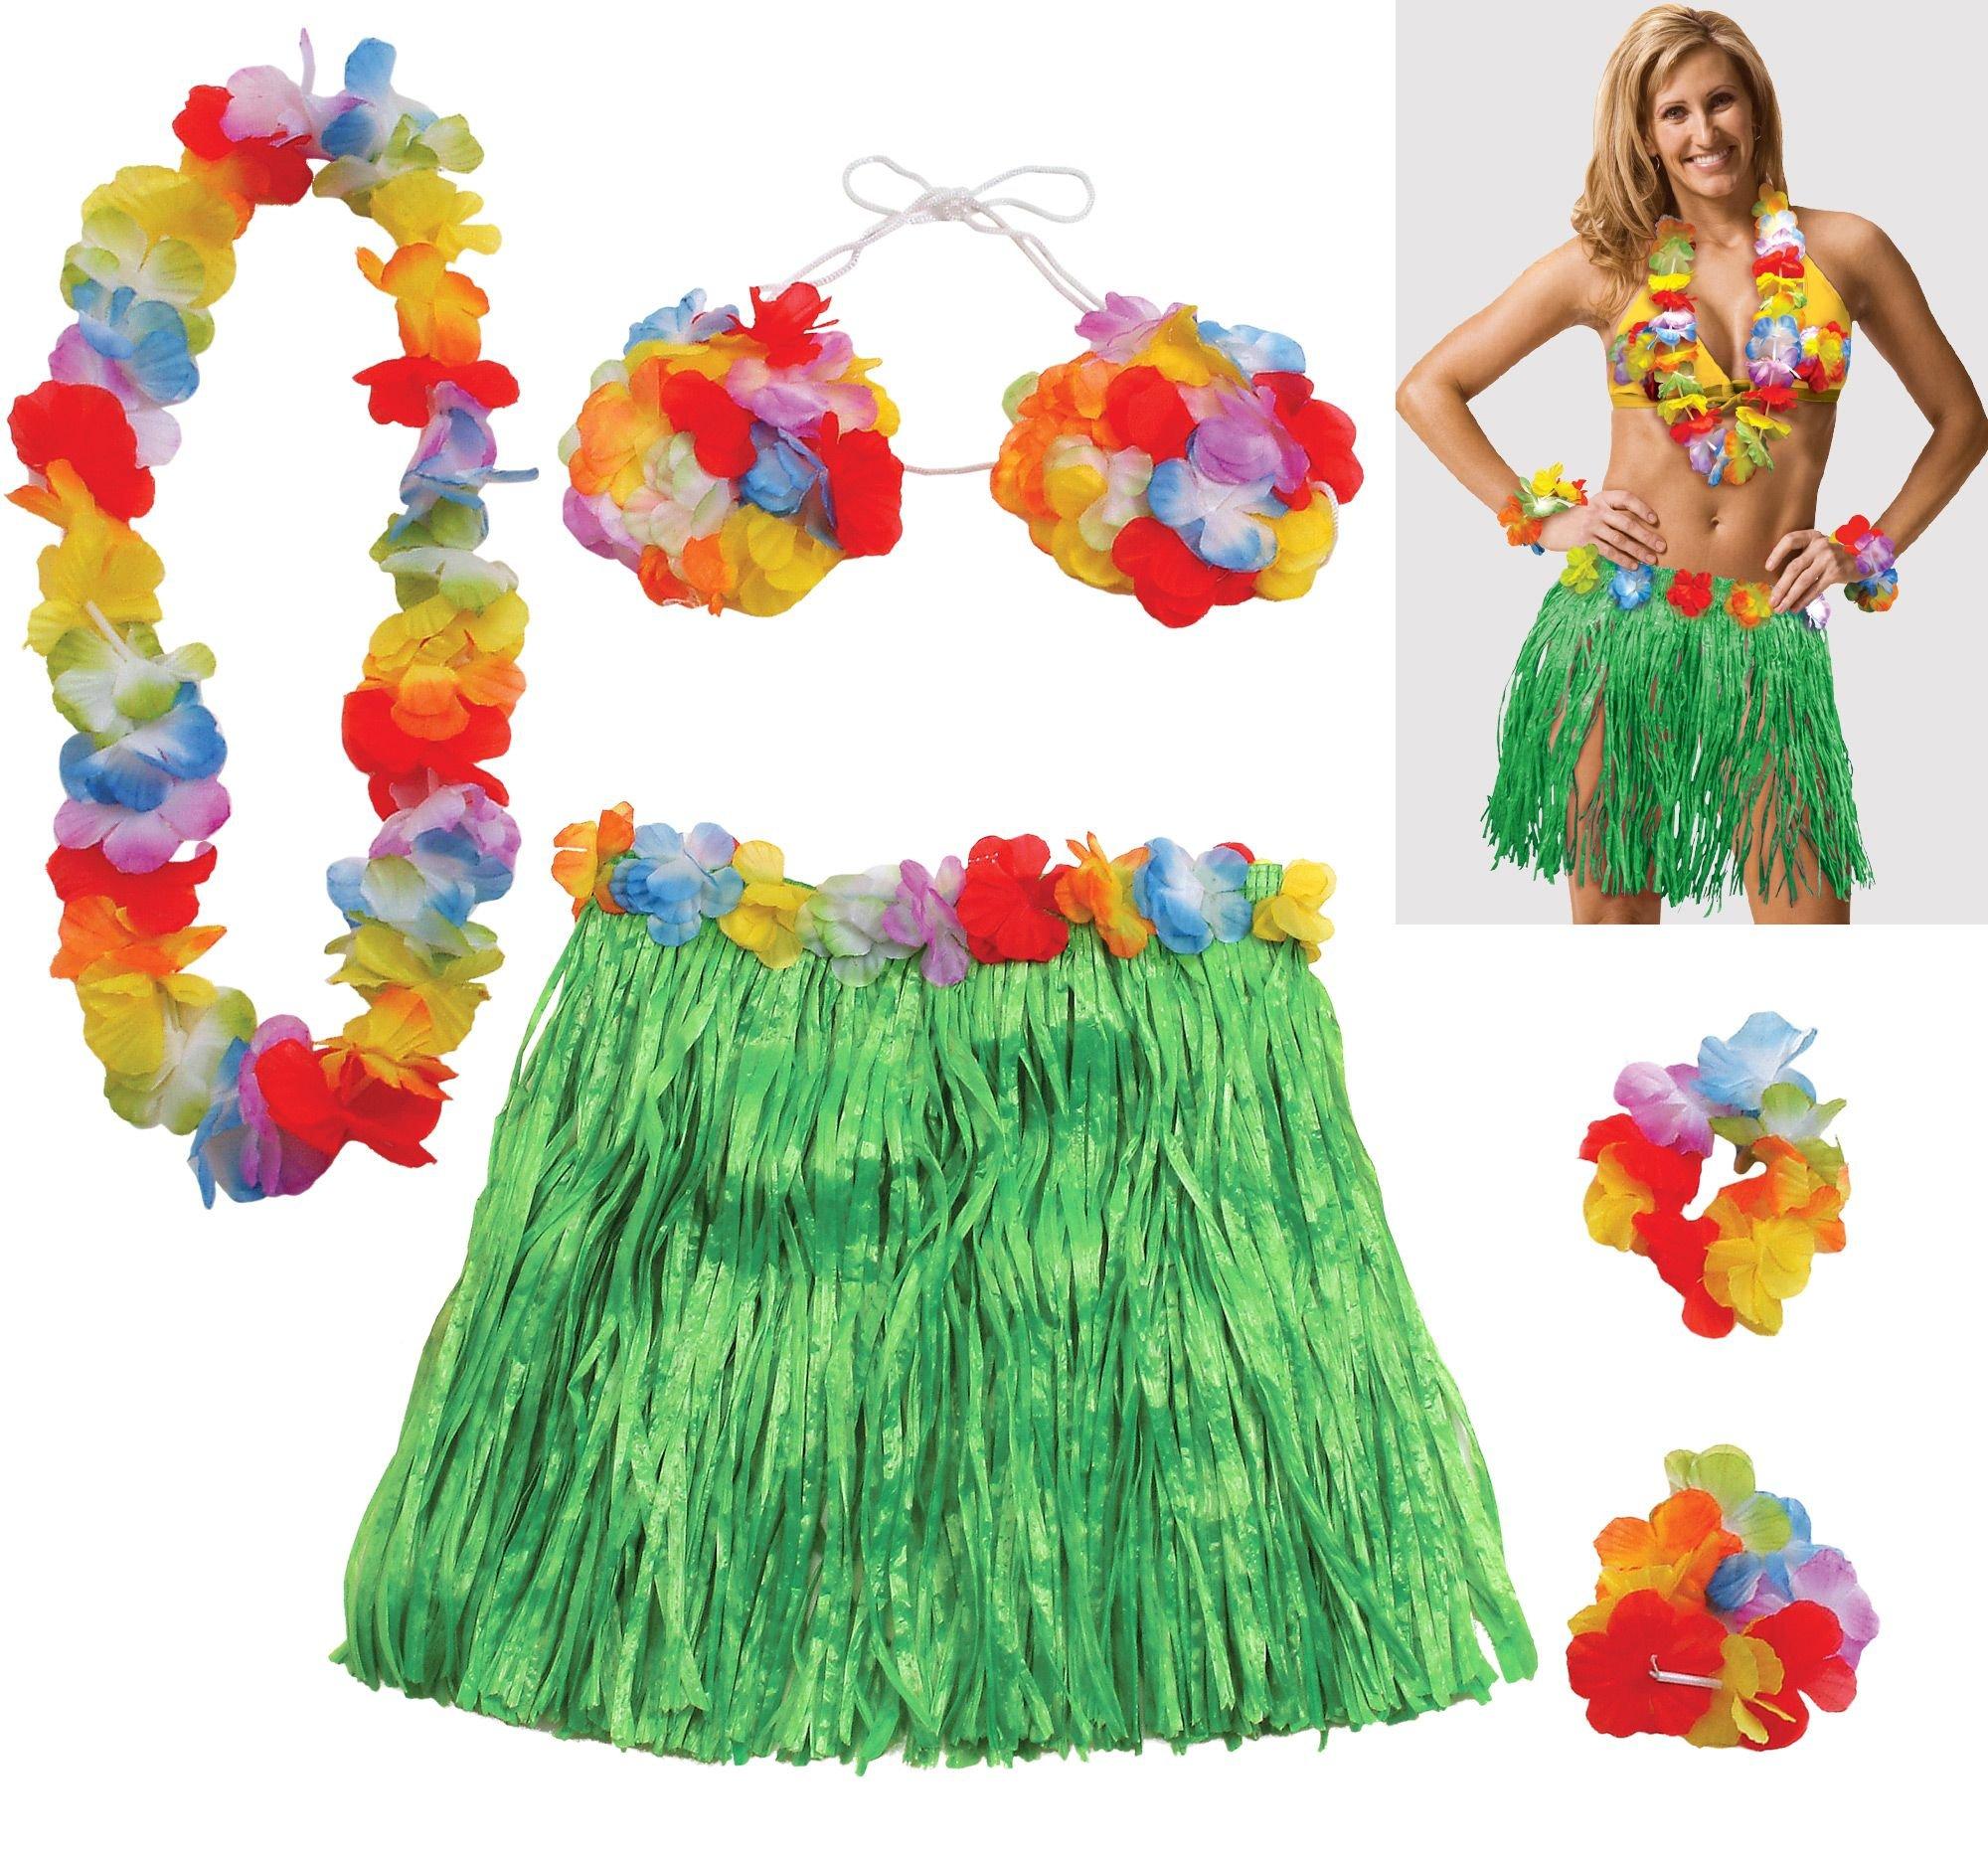 8 Sets Hula Skirt Costume Accessory Kit with 40 cm Hawaiian Grass  Skirts,Girls Coconut Bra,Wreath Necklace and Headbands,Flower Bracelets for  Girl